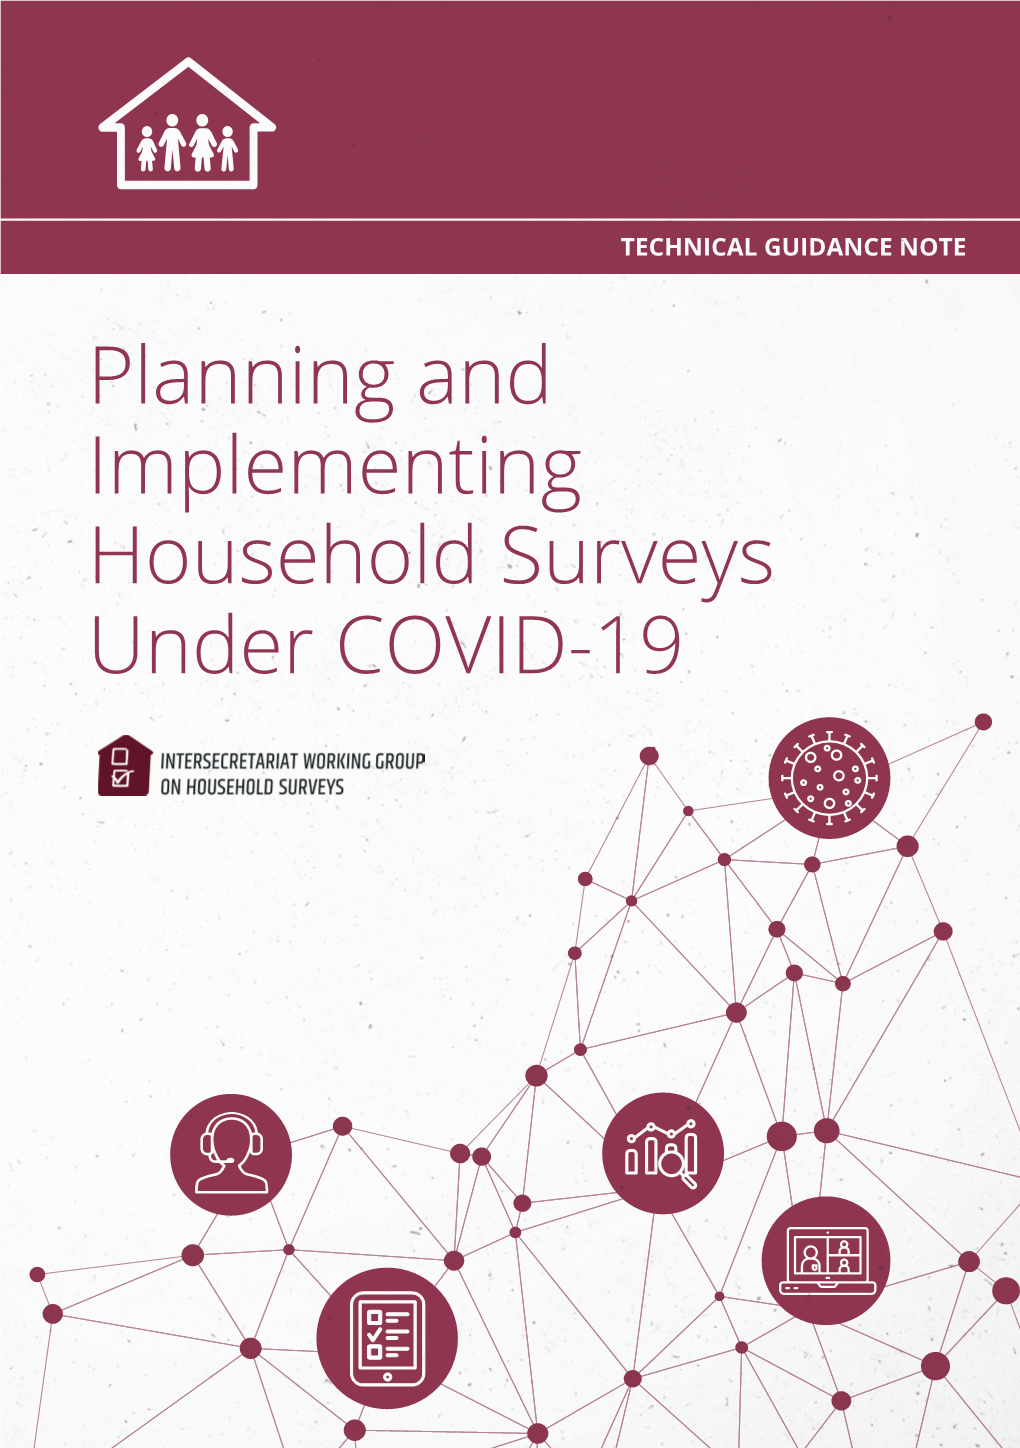 Planning and Implementing Household Surveys Under COVID-19